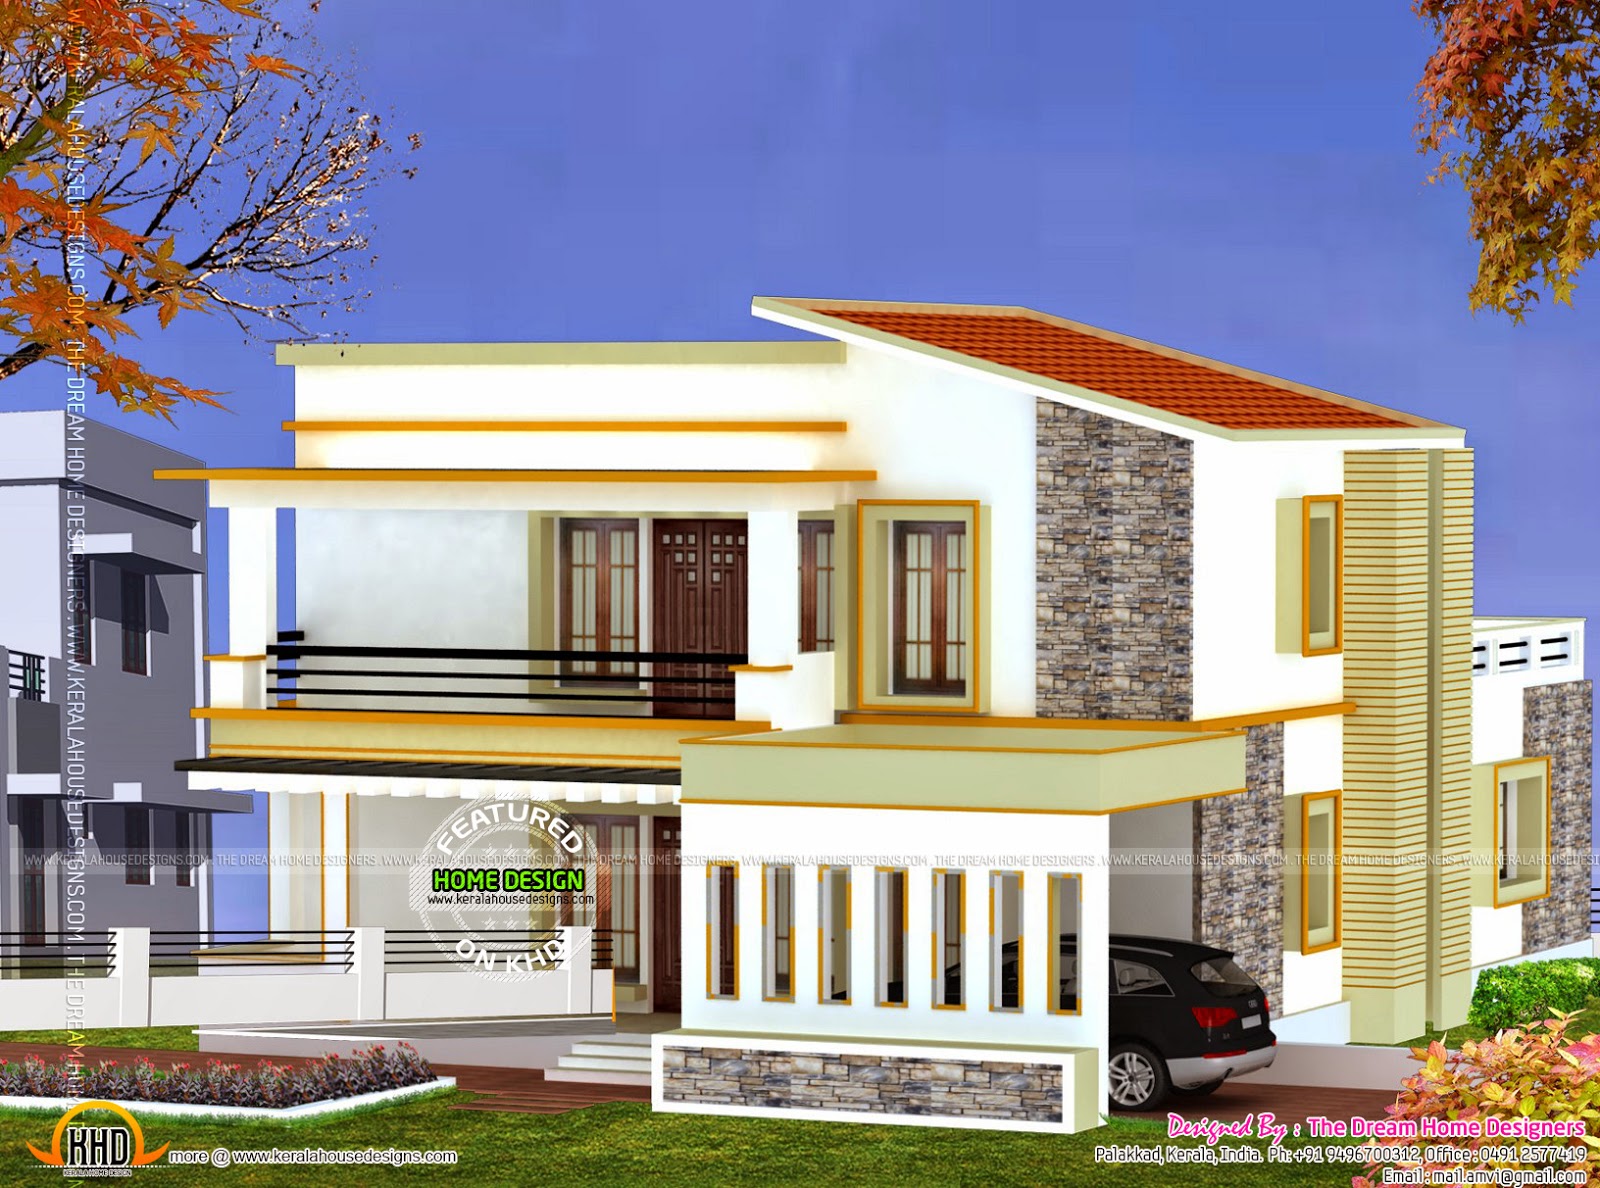 3d view and floor plan - Kerala home design and floor plans